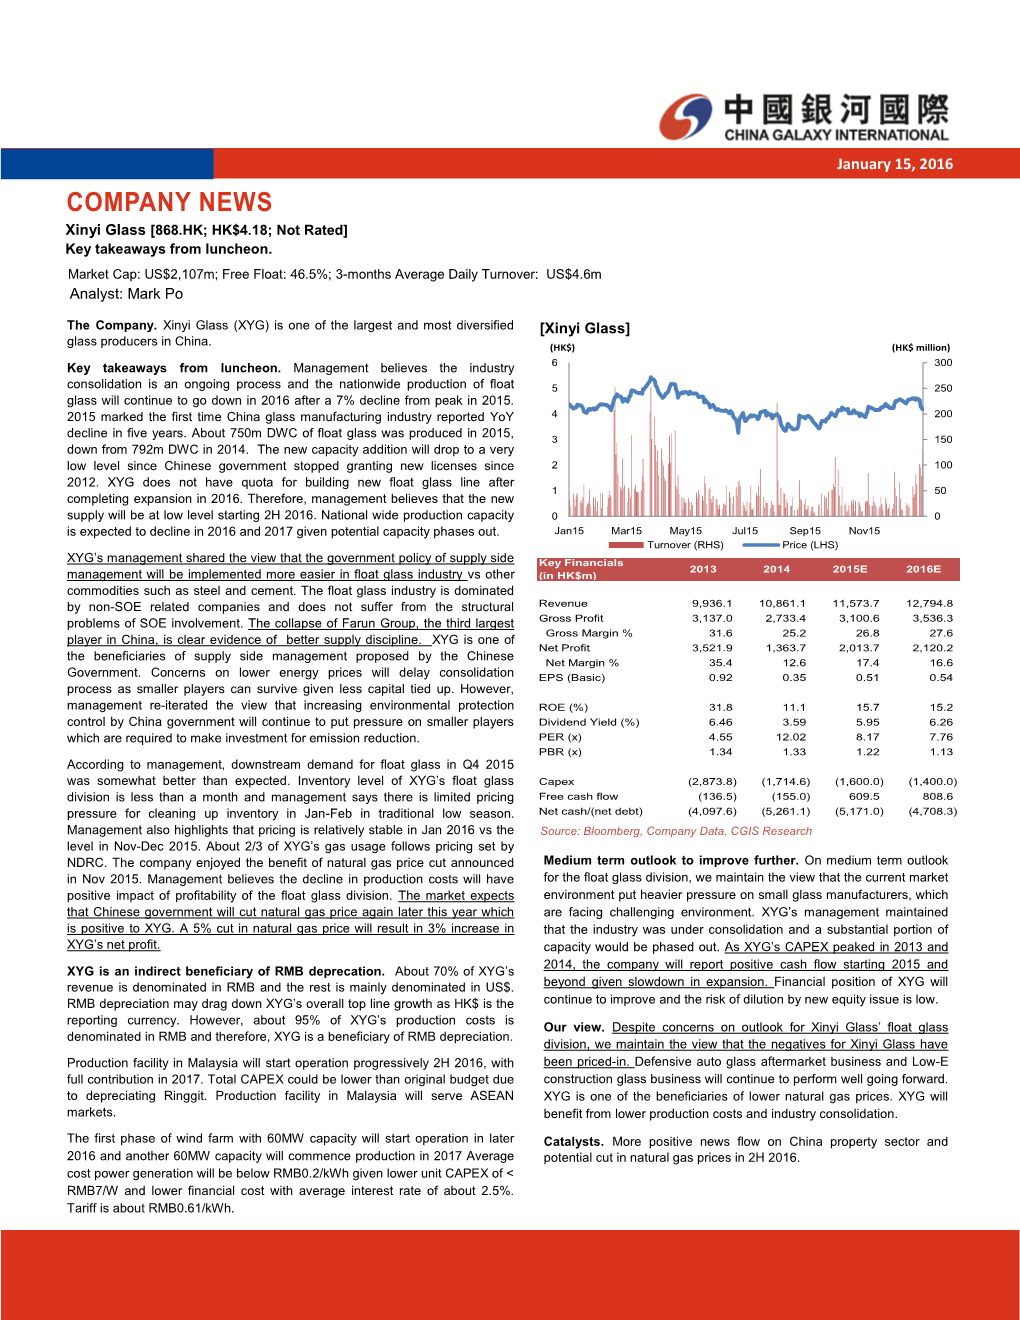 COMPANY NEWS Xinyi Glass [868.HK; HK$4.18; Not Rated] Key Takeaways from Luncheon